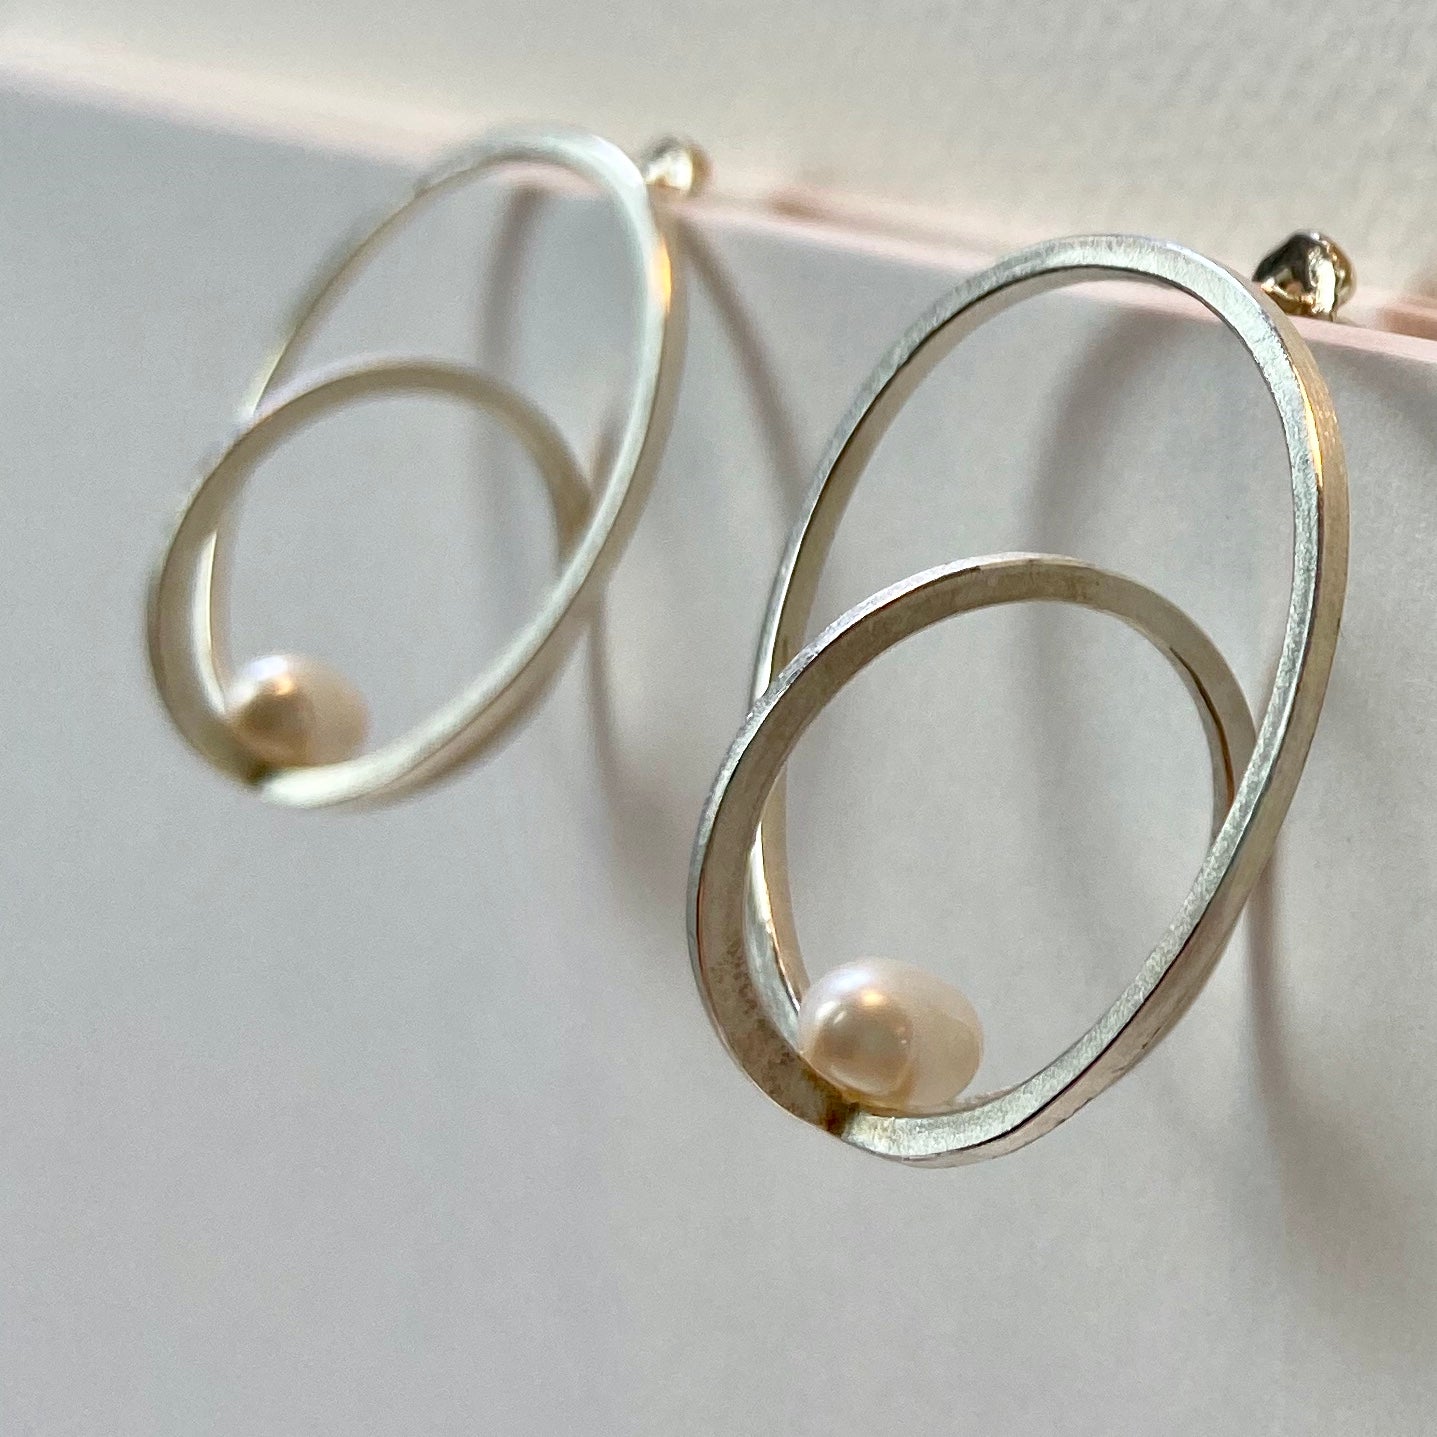 Silver Circles with Pearl - The Nancy Smillie Shop - Art, Jewellery & Designer Gifts Glasgow